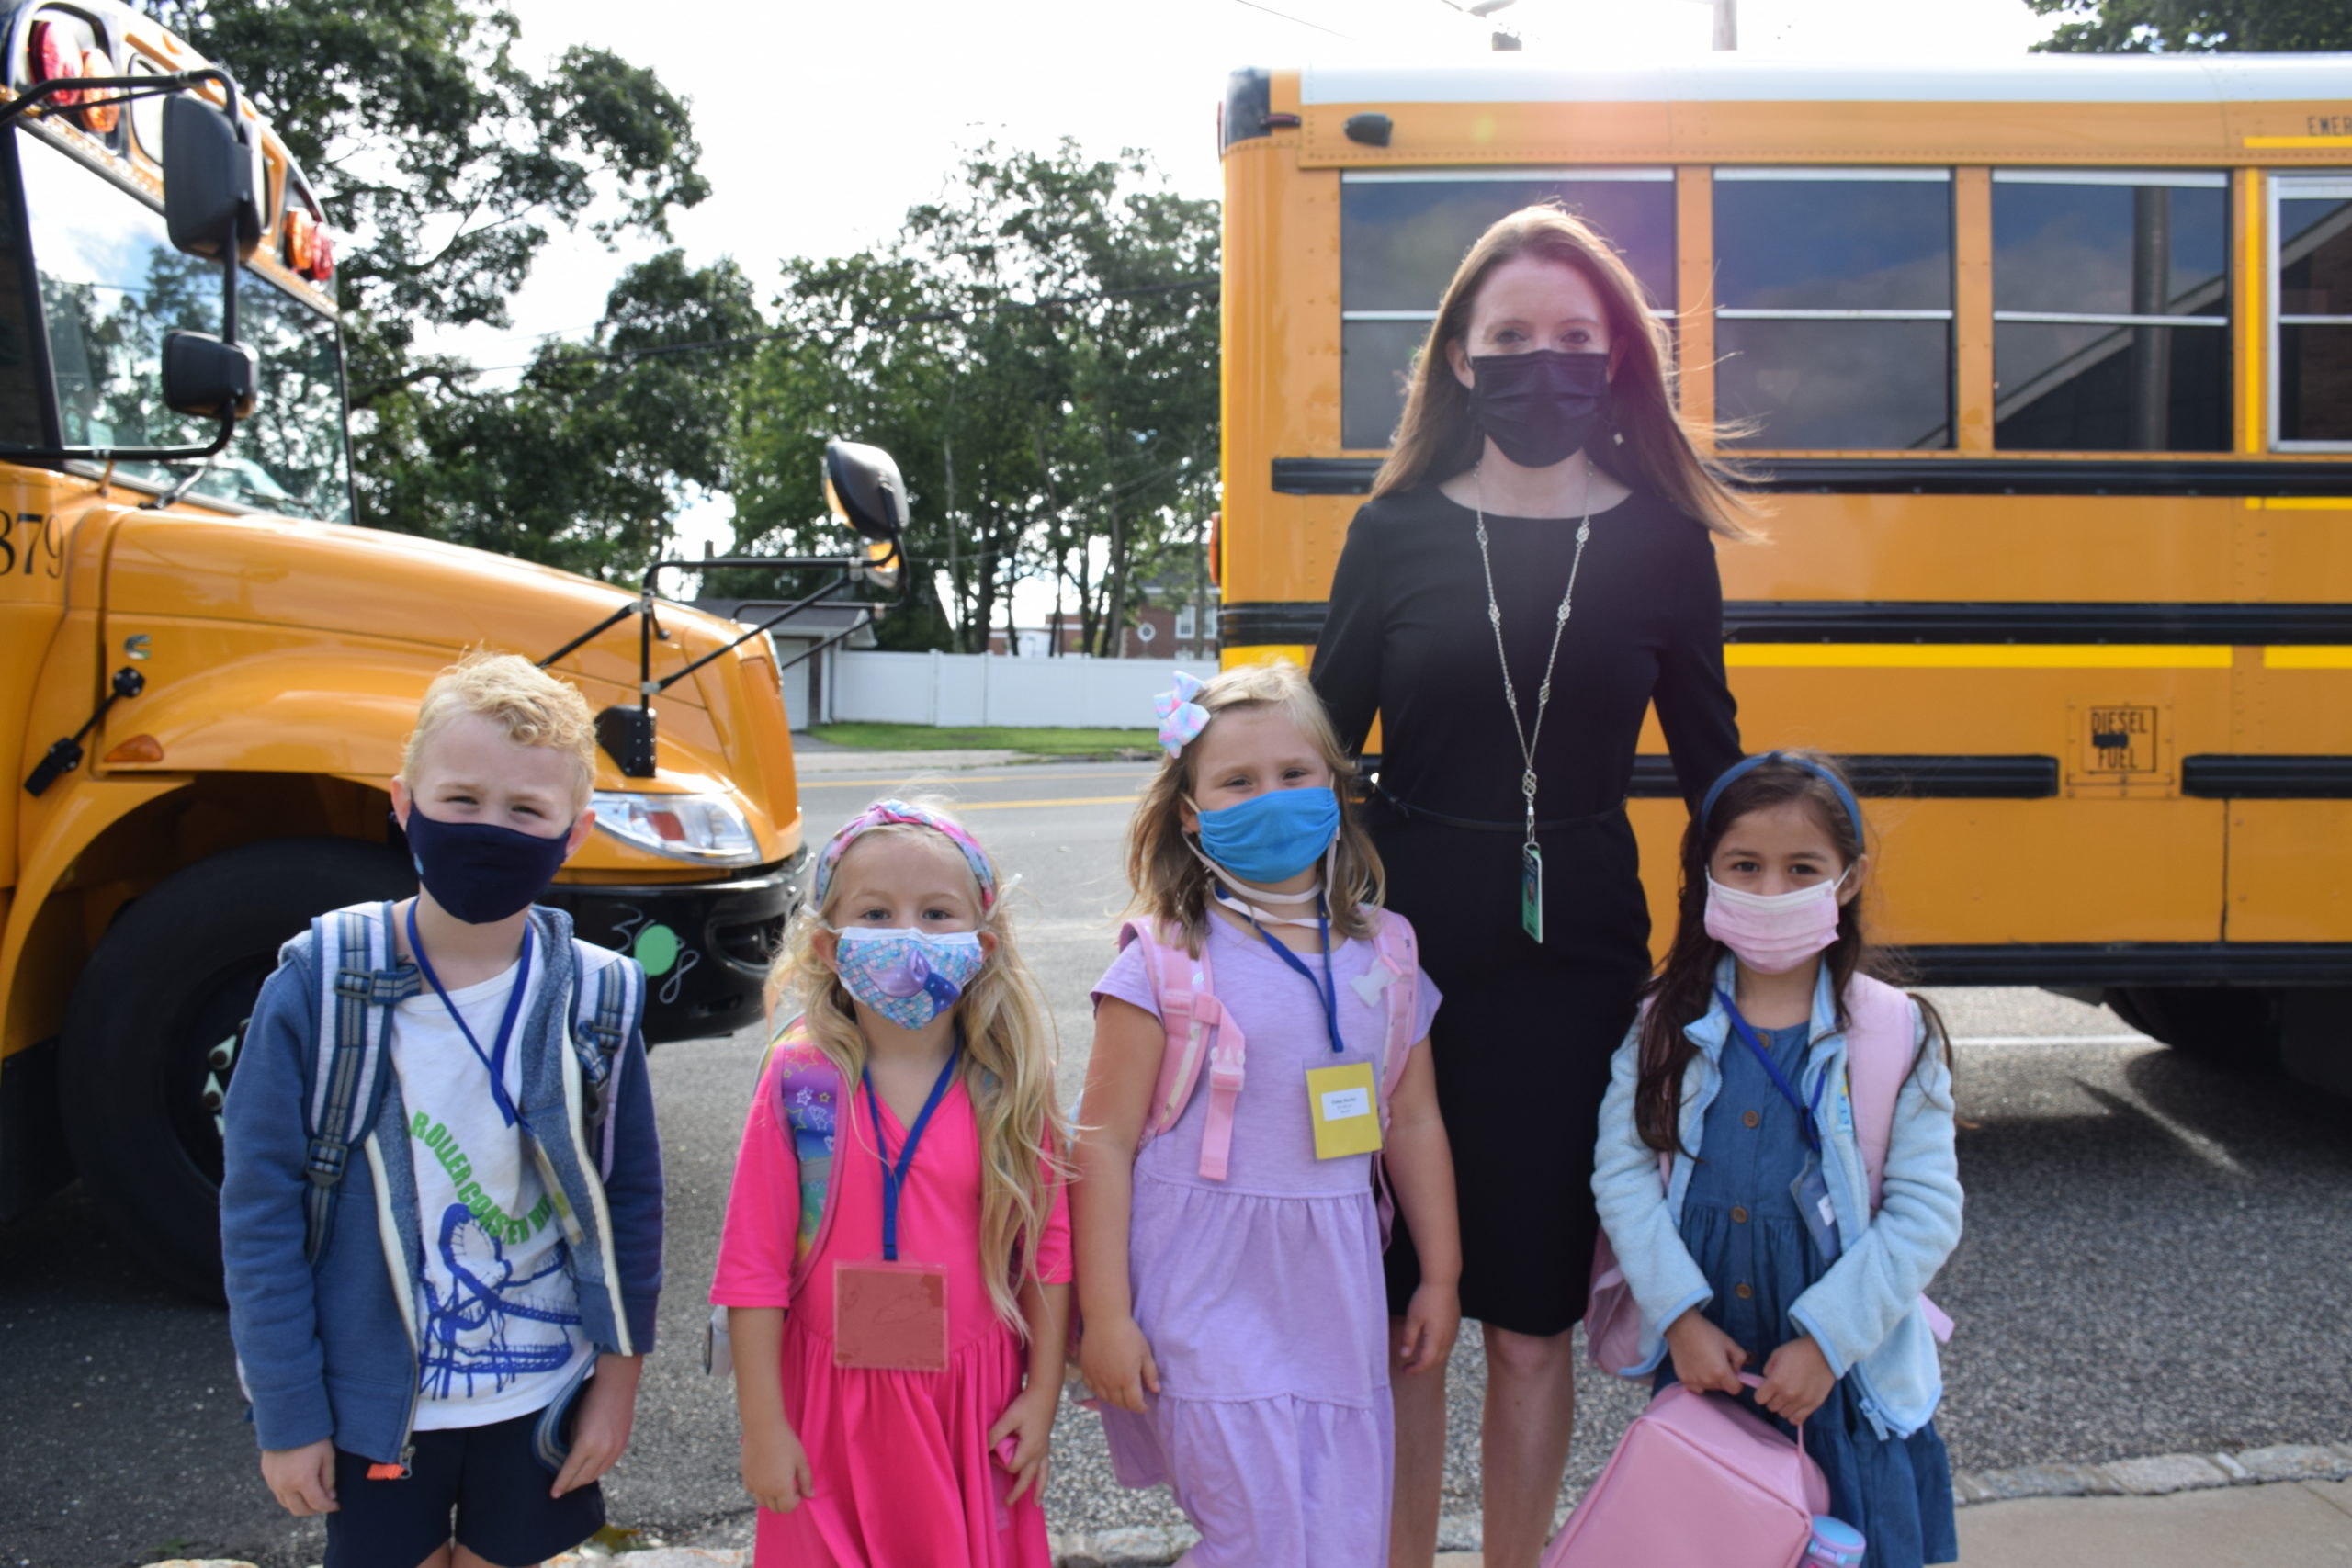 Superintendent of Schools Dr. Carolyn Probst greets students on their first day of school last week in Westhampton Beach.